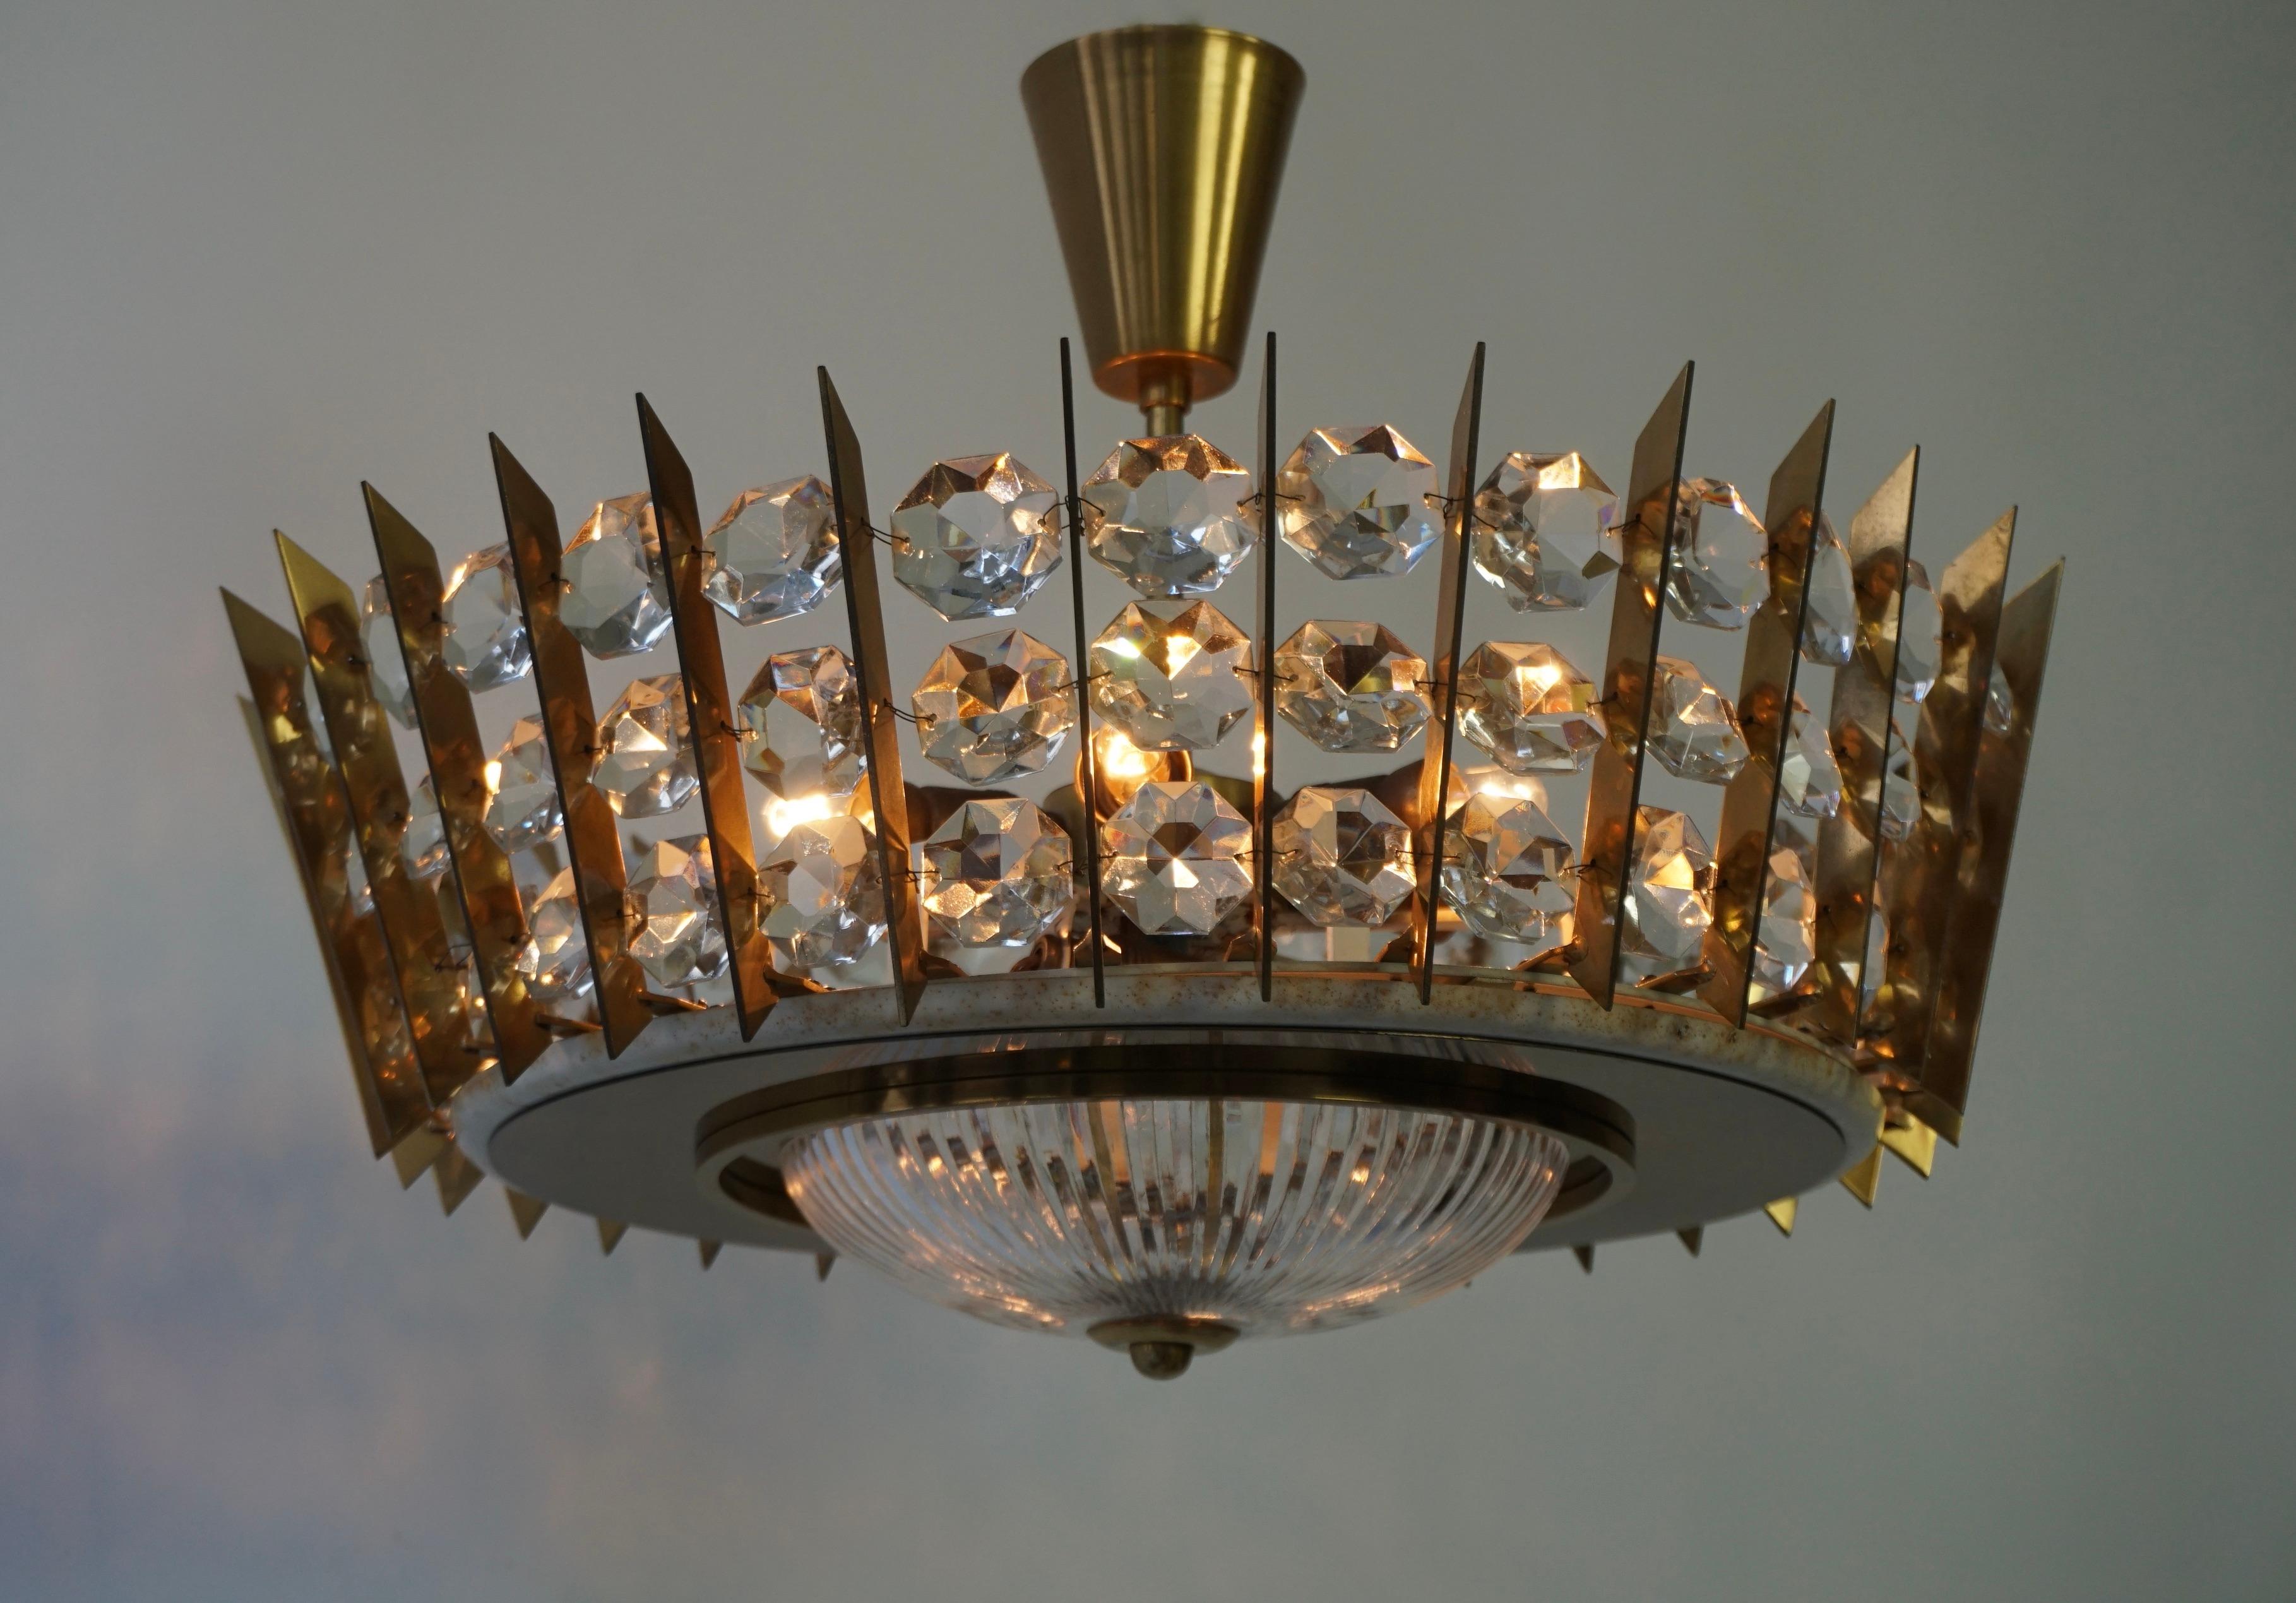 Amazing elegant flush mount or chandelier in crystal and brass. The piece shows a large quantity of brass elements, combined with crystal beads and thick faceted glass shapes.  

High quality and in very good condition. 

The fixture requires 8 x